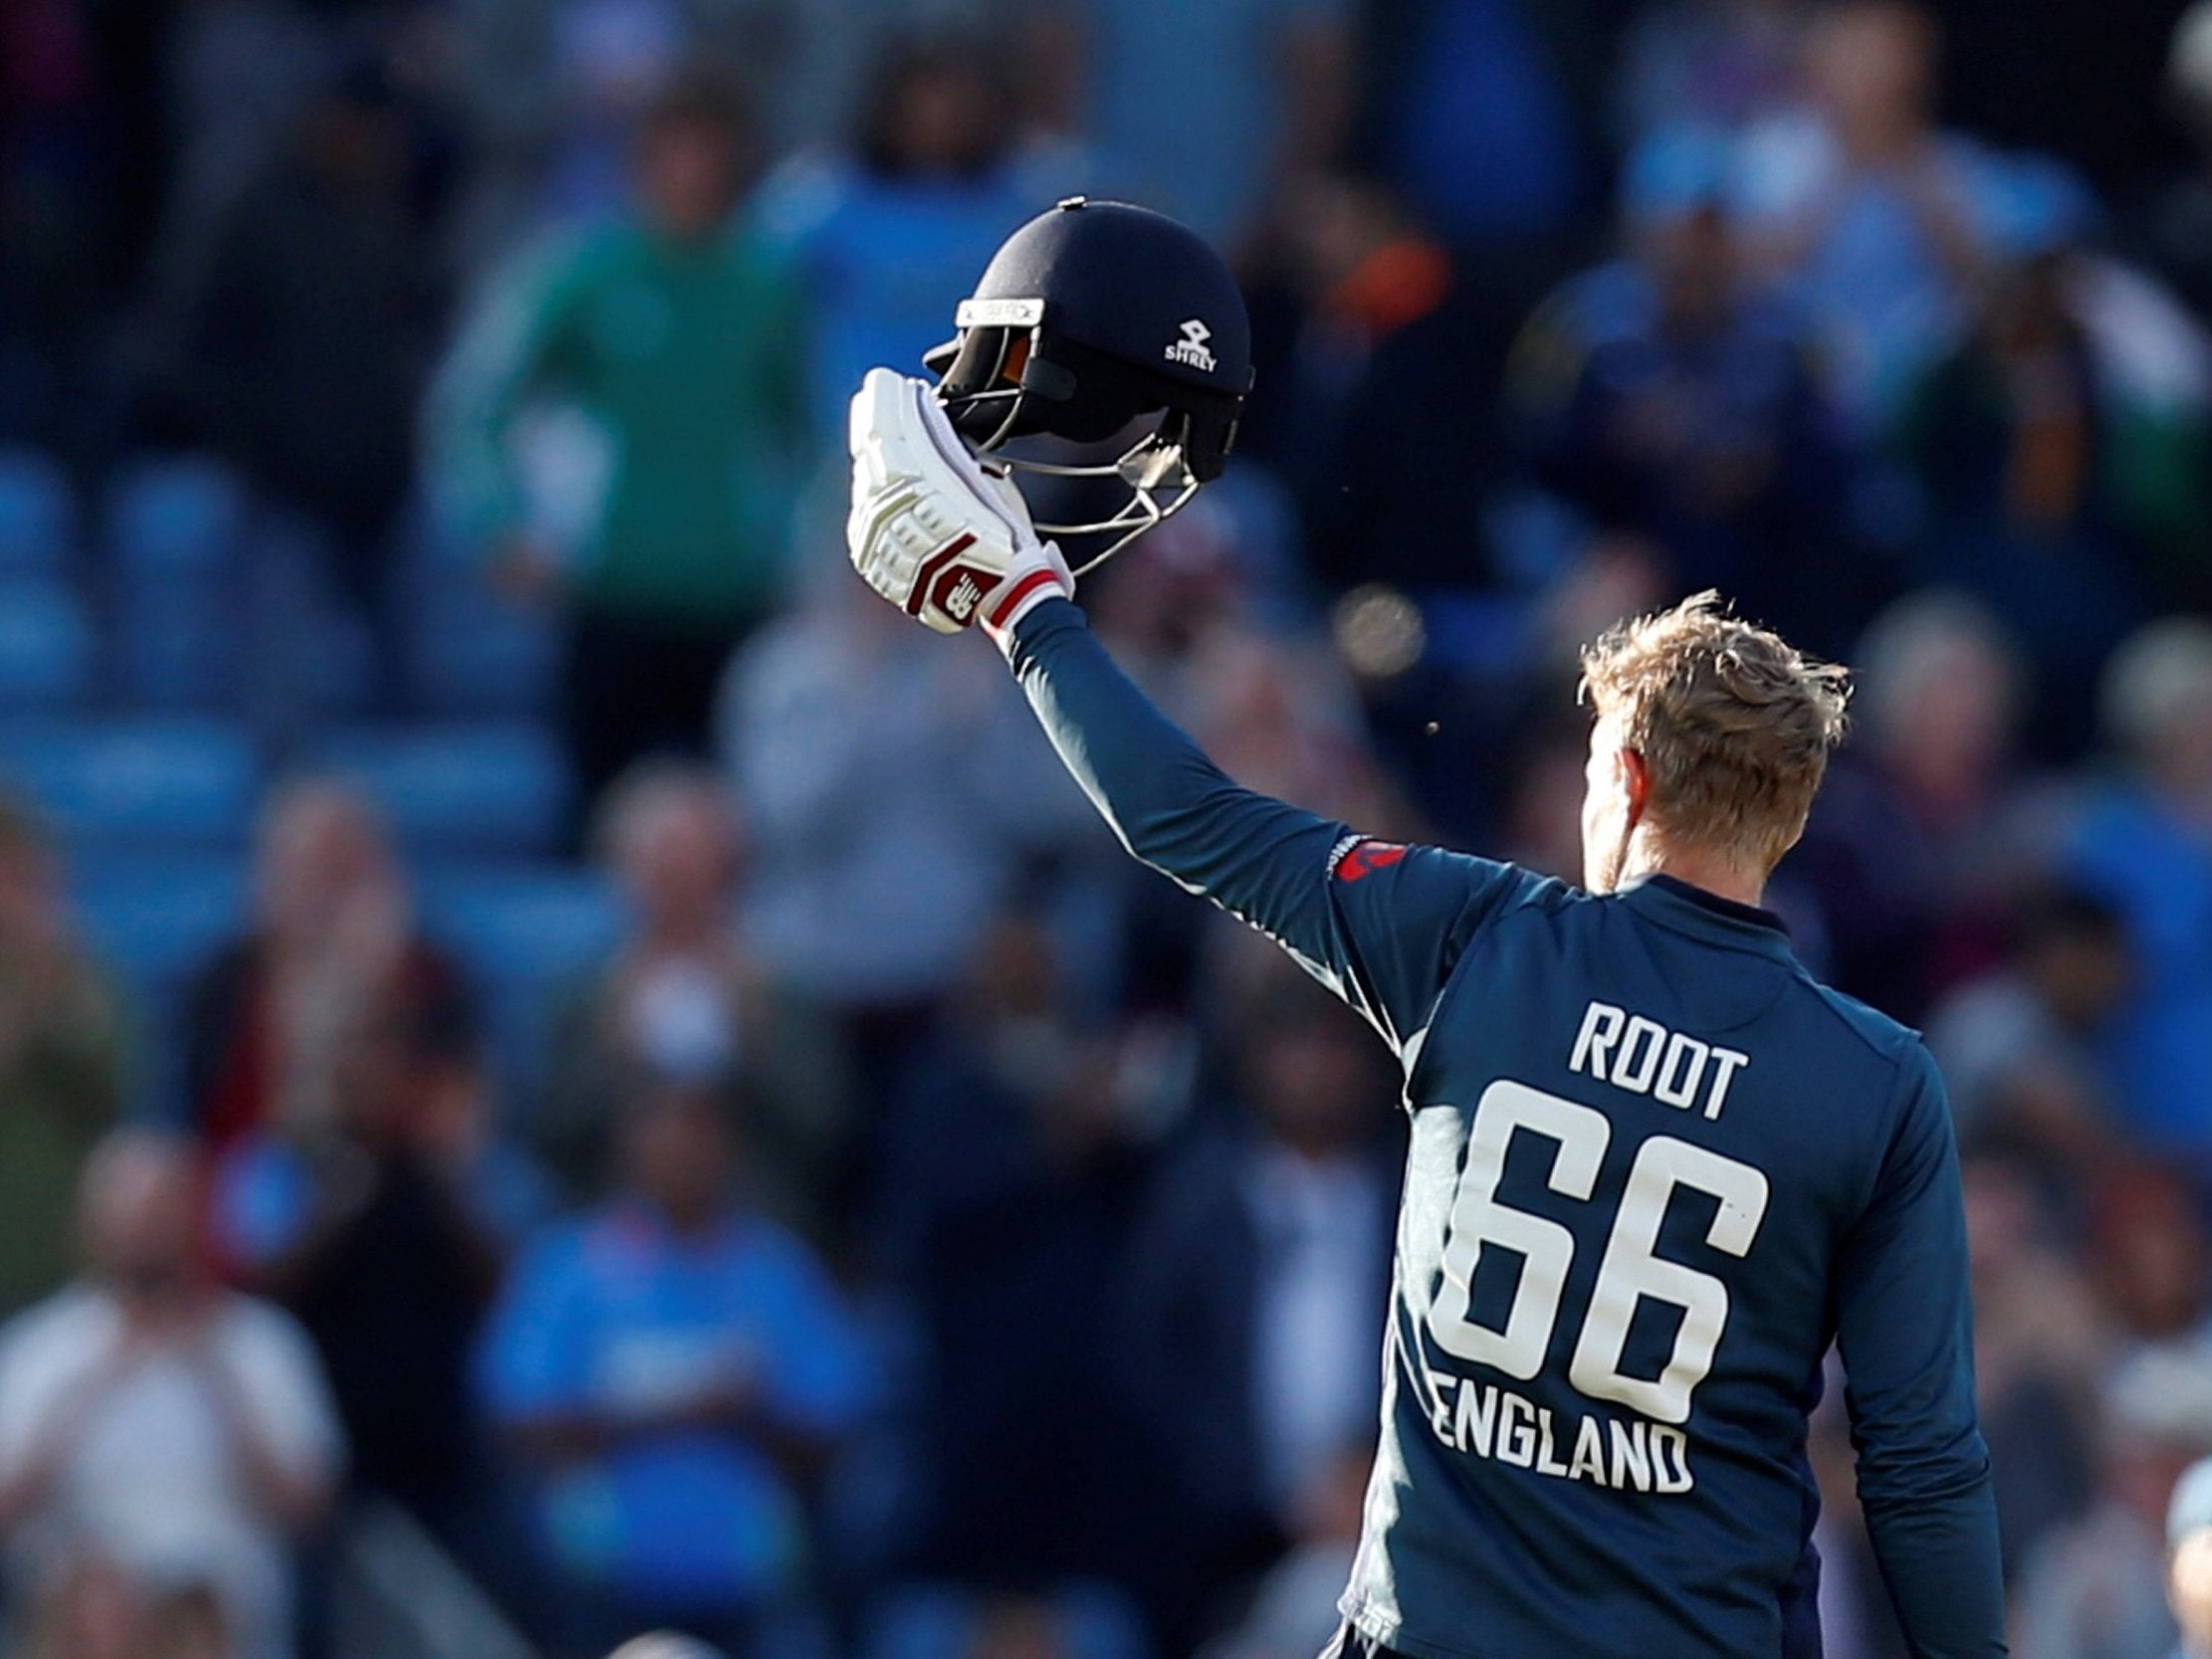 Root hit a century from the last ball of the match for England